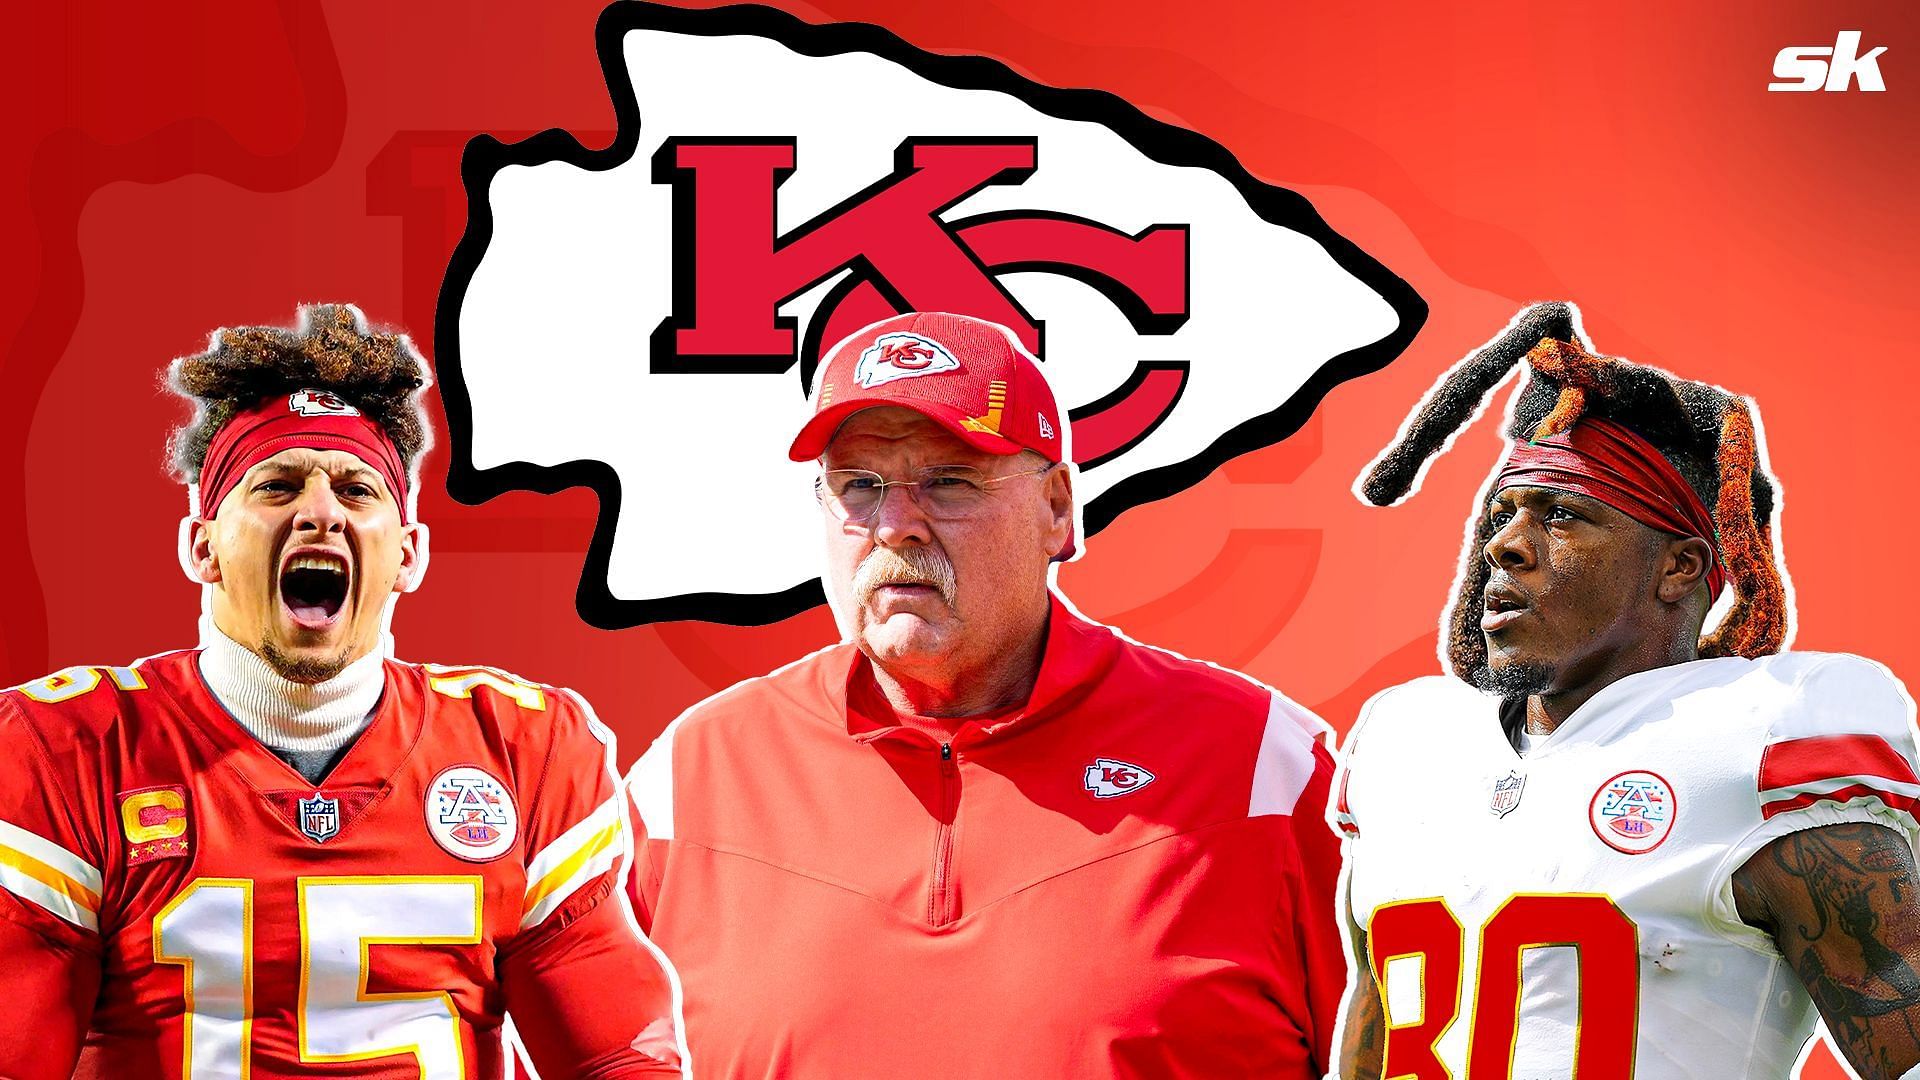 Richie James discusses joining Andy Reid